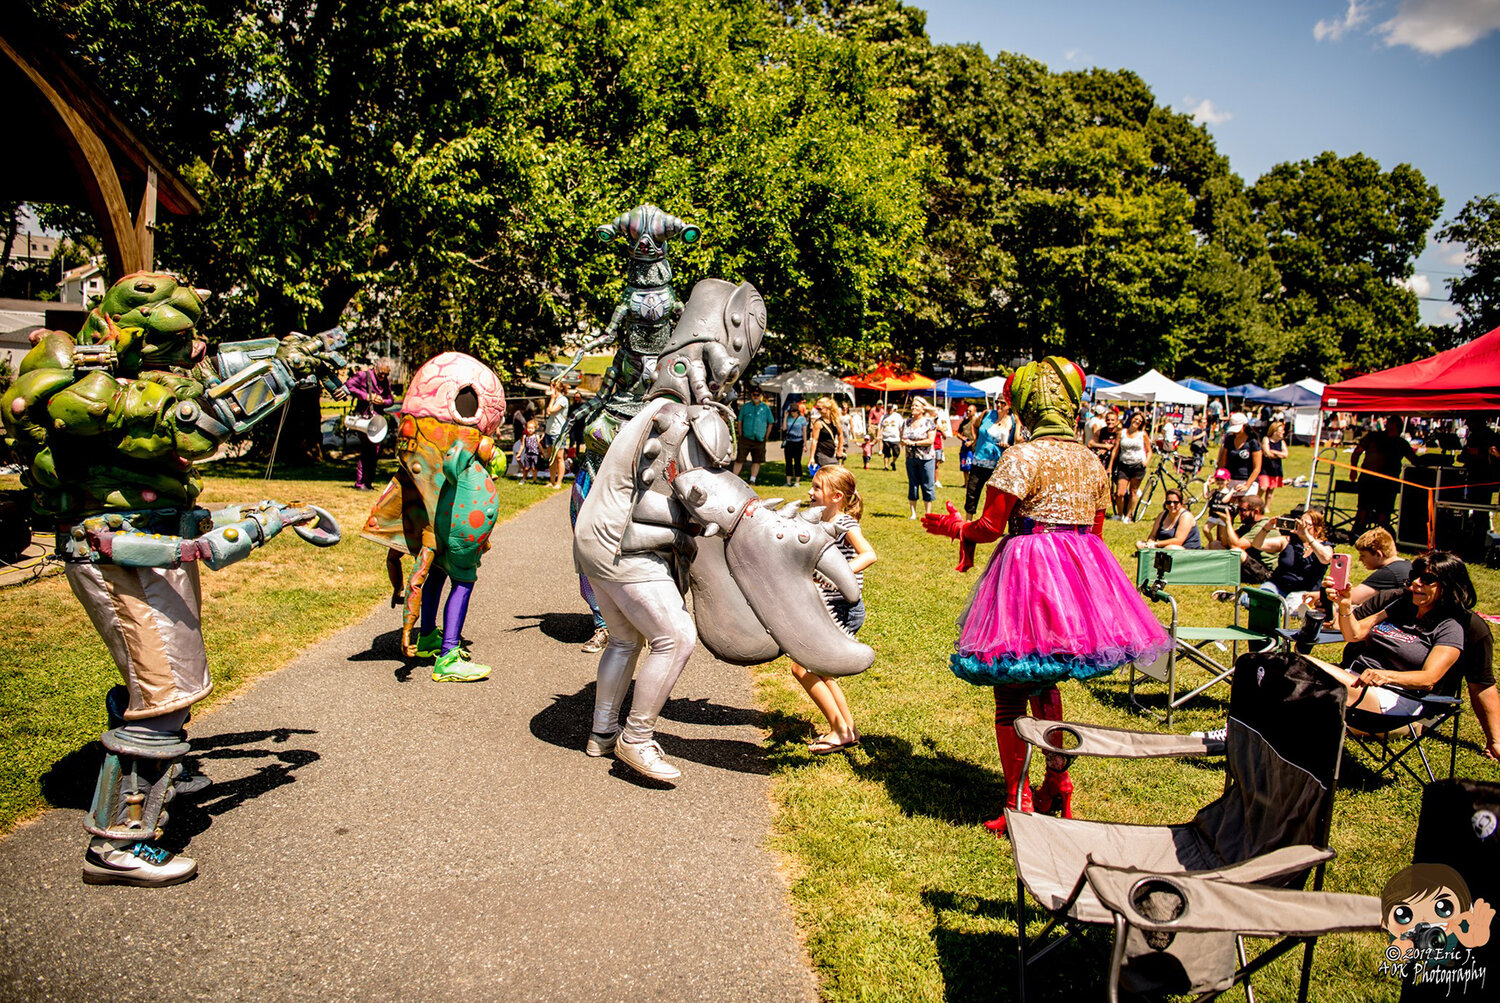 The Looff Arts Festival promises creative fun for all ages (and BIG NAZO space creatures!)